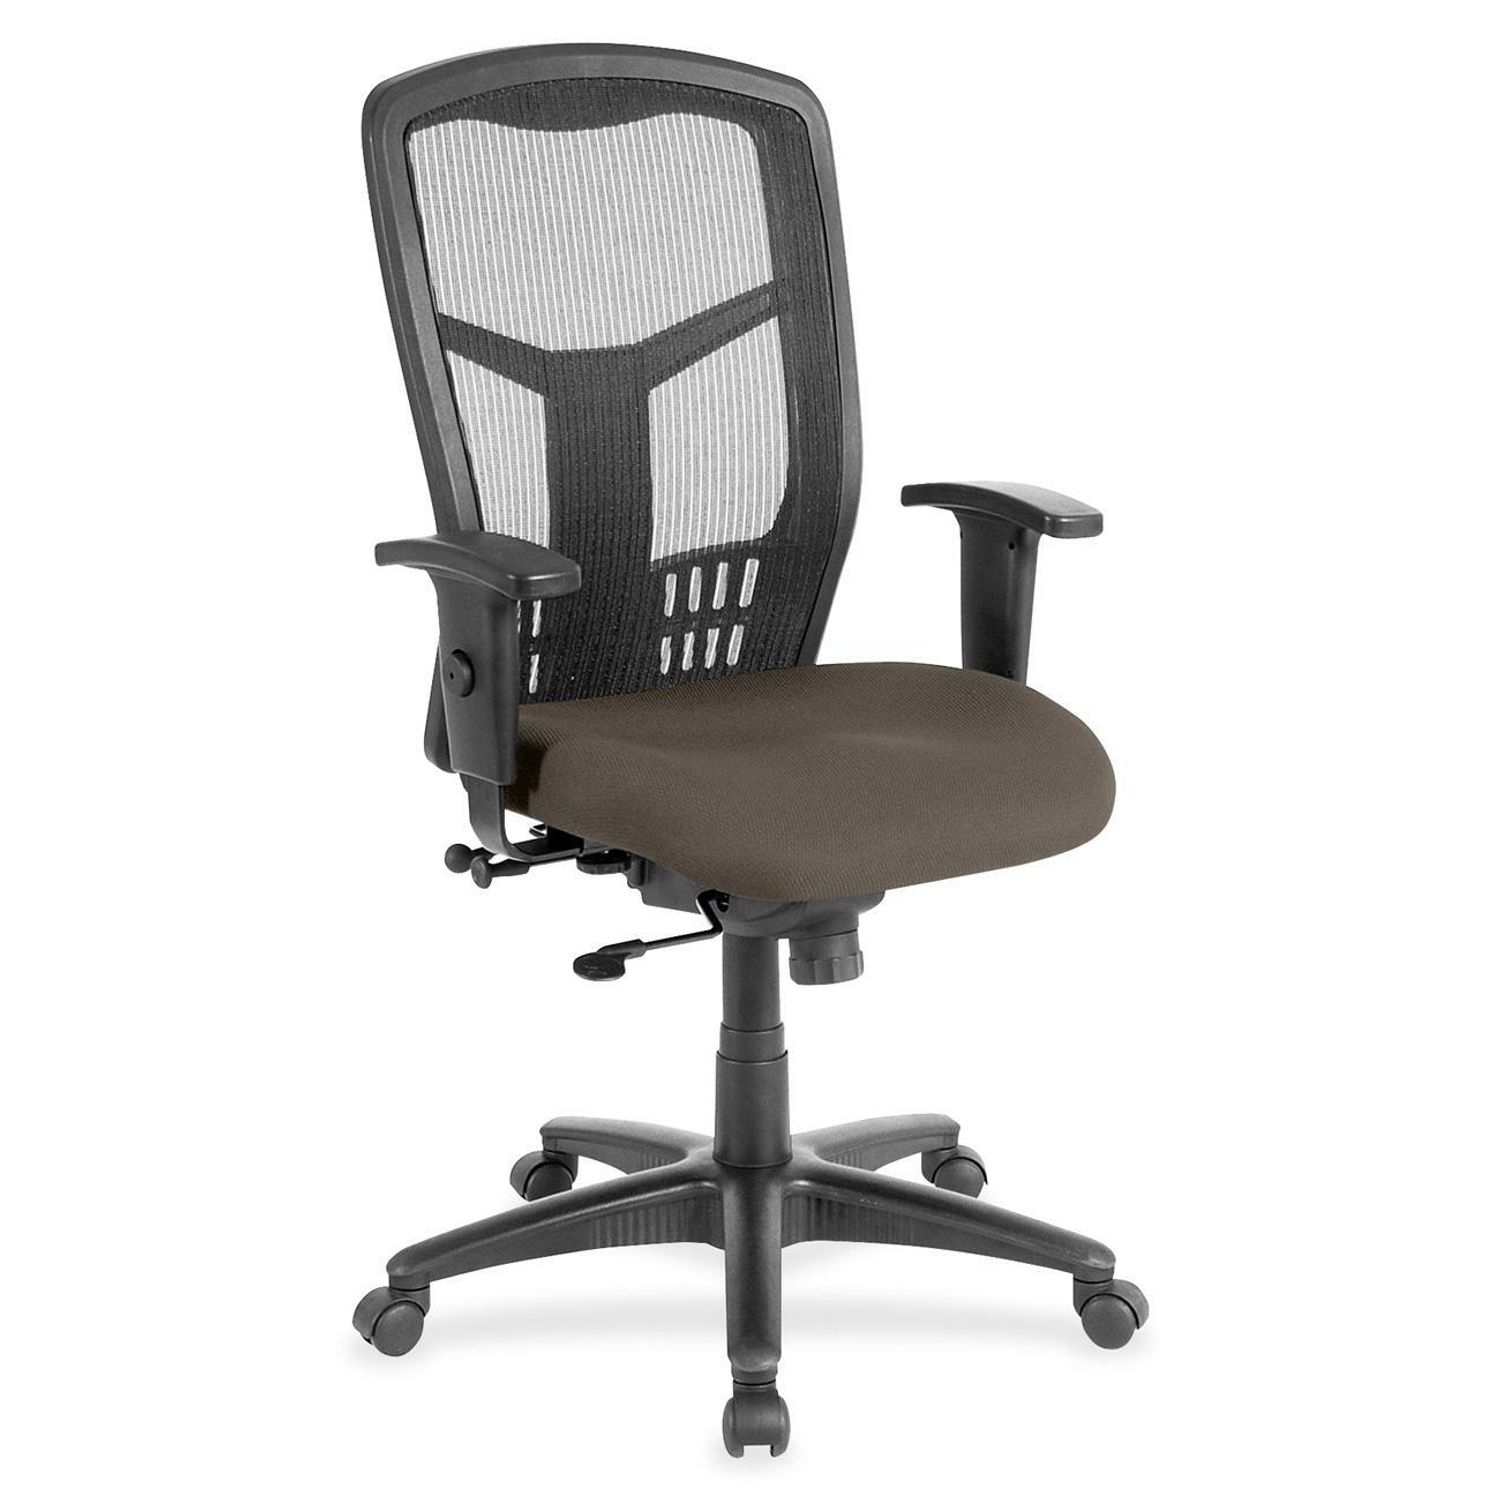 High-Back Executive Chair Shire Stonewall Fabric Seat, Steel Frame, 1 Each